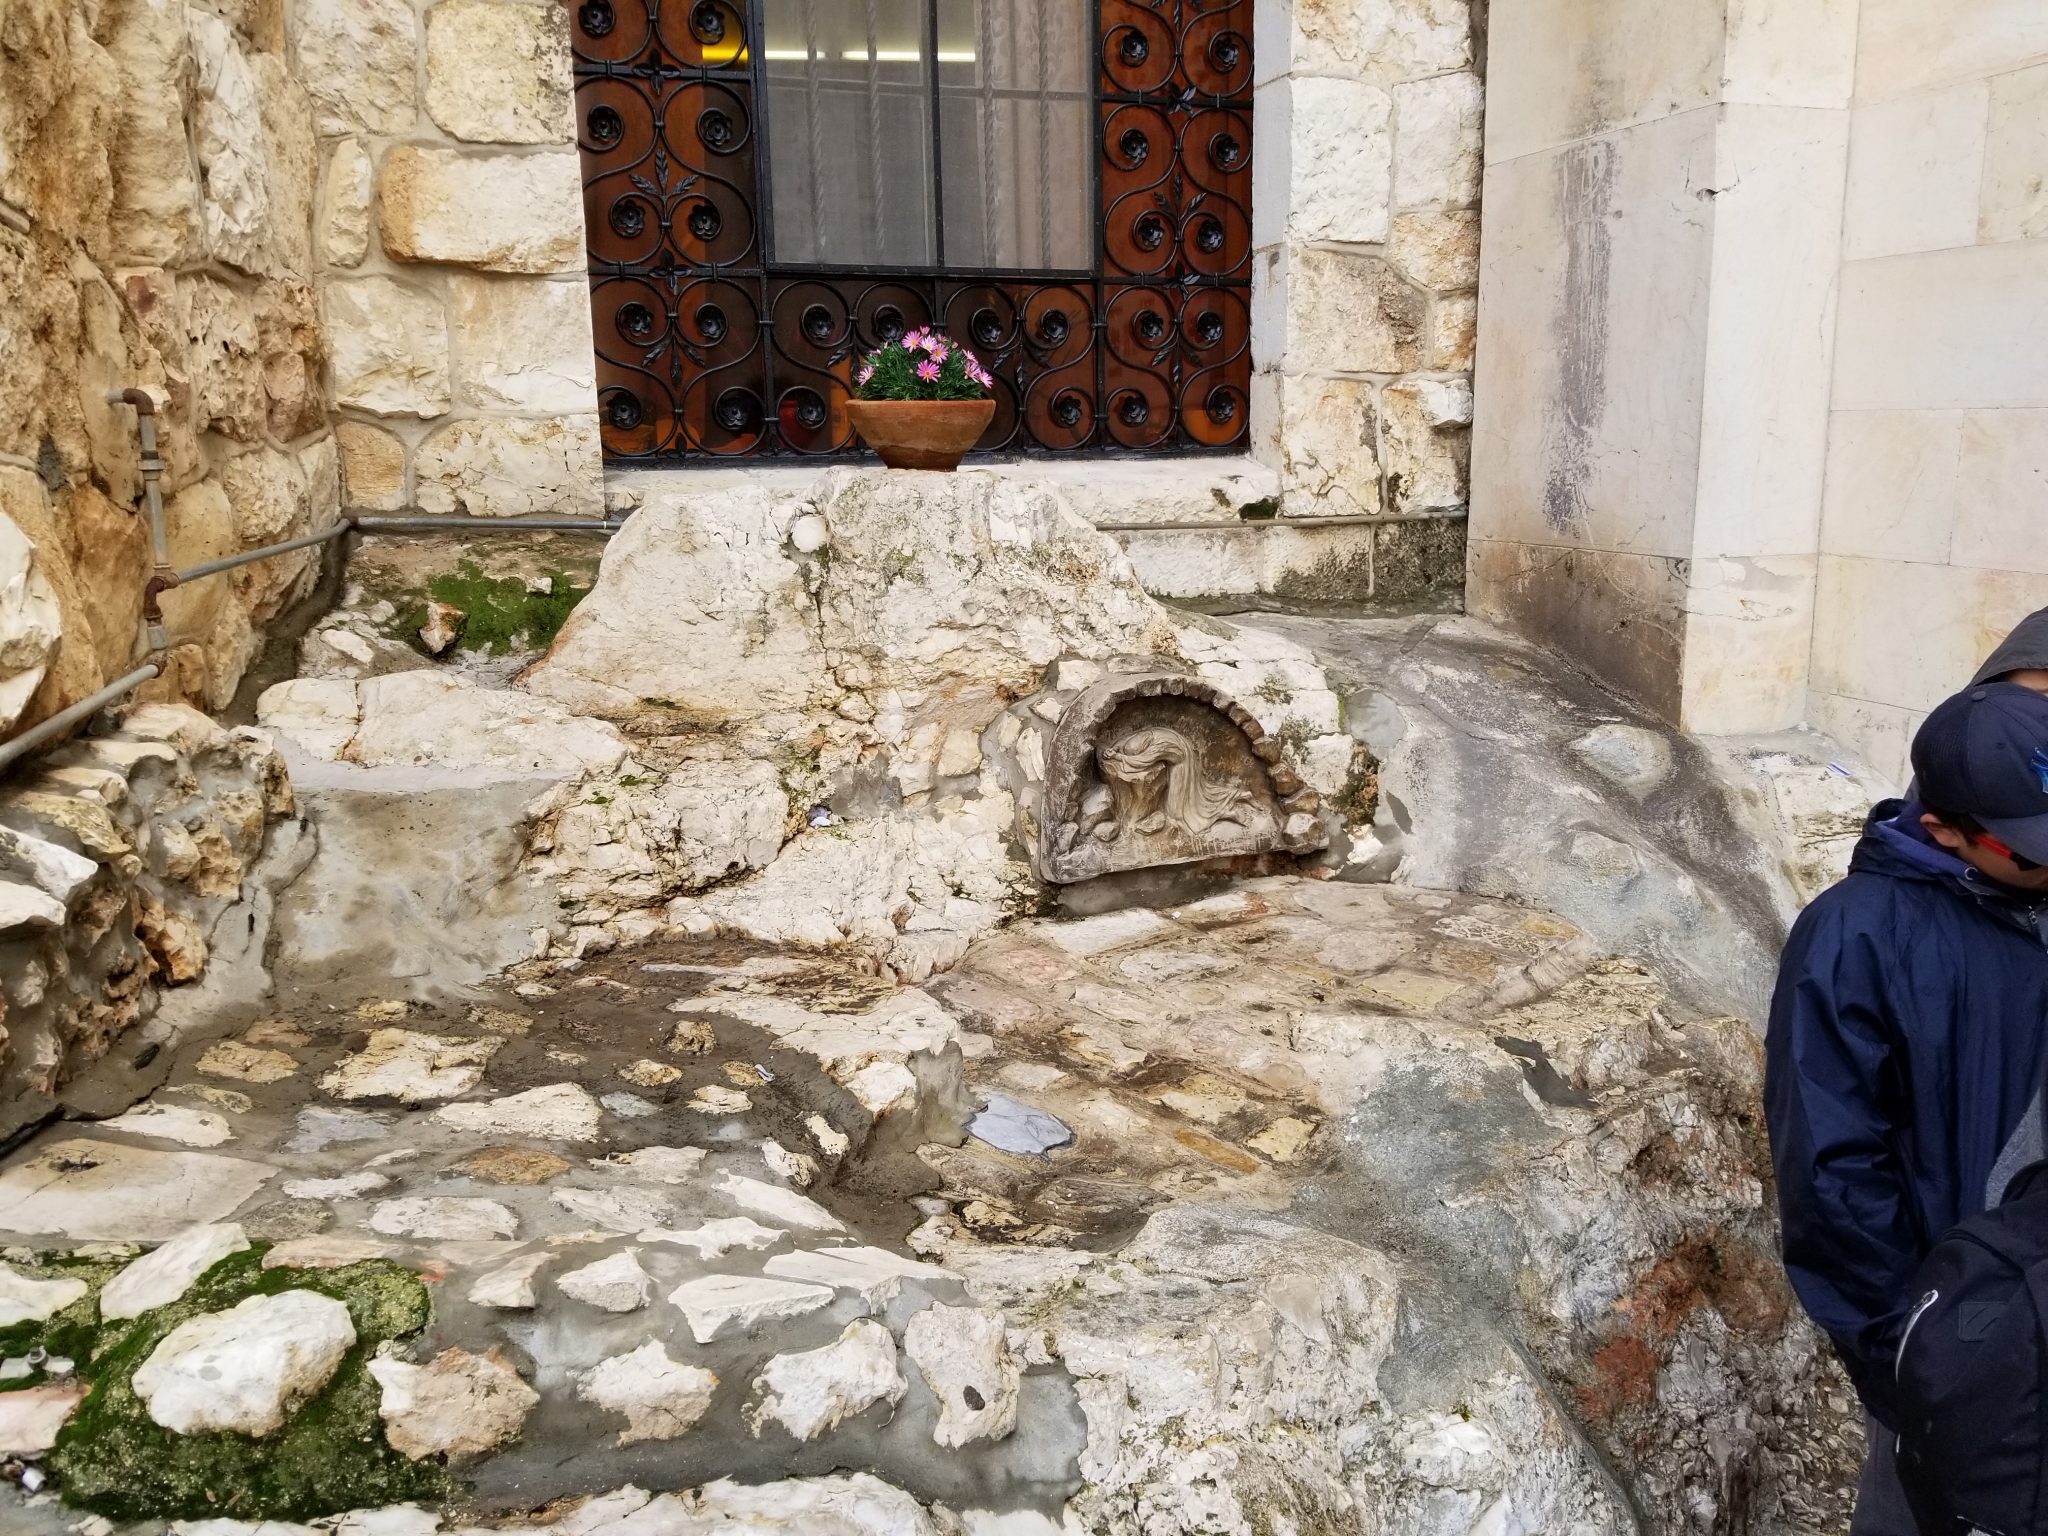 Traditional stone where Christ prayed in the Garden of Gethsemane